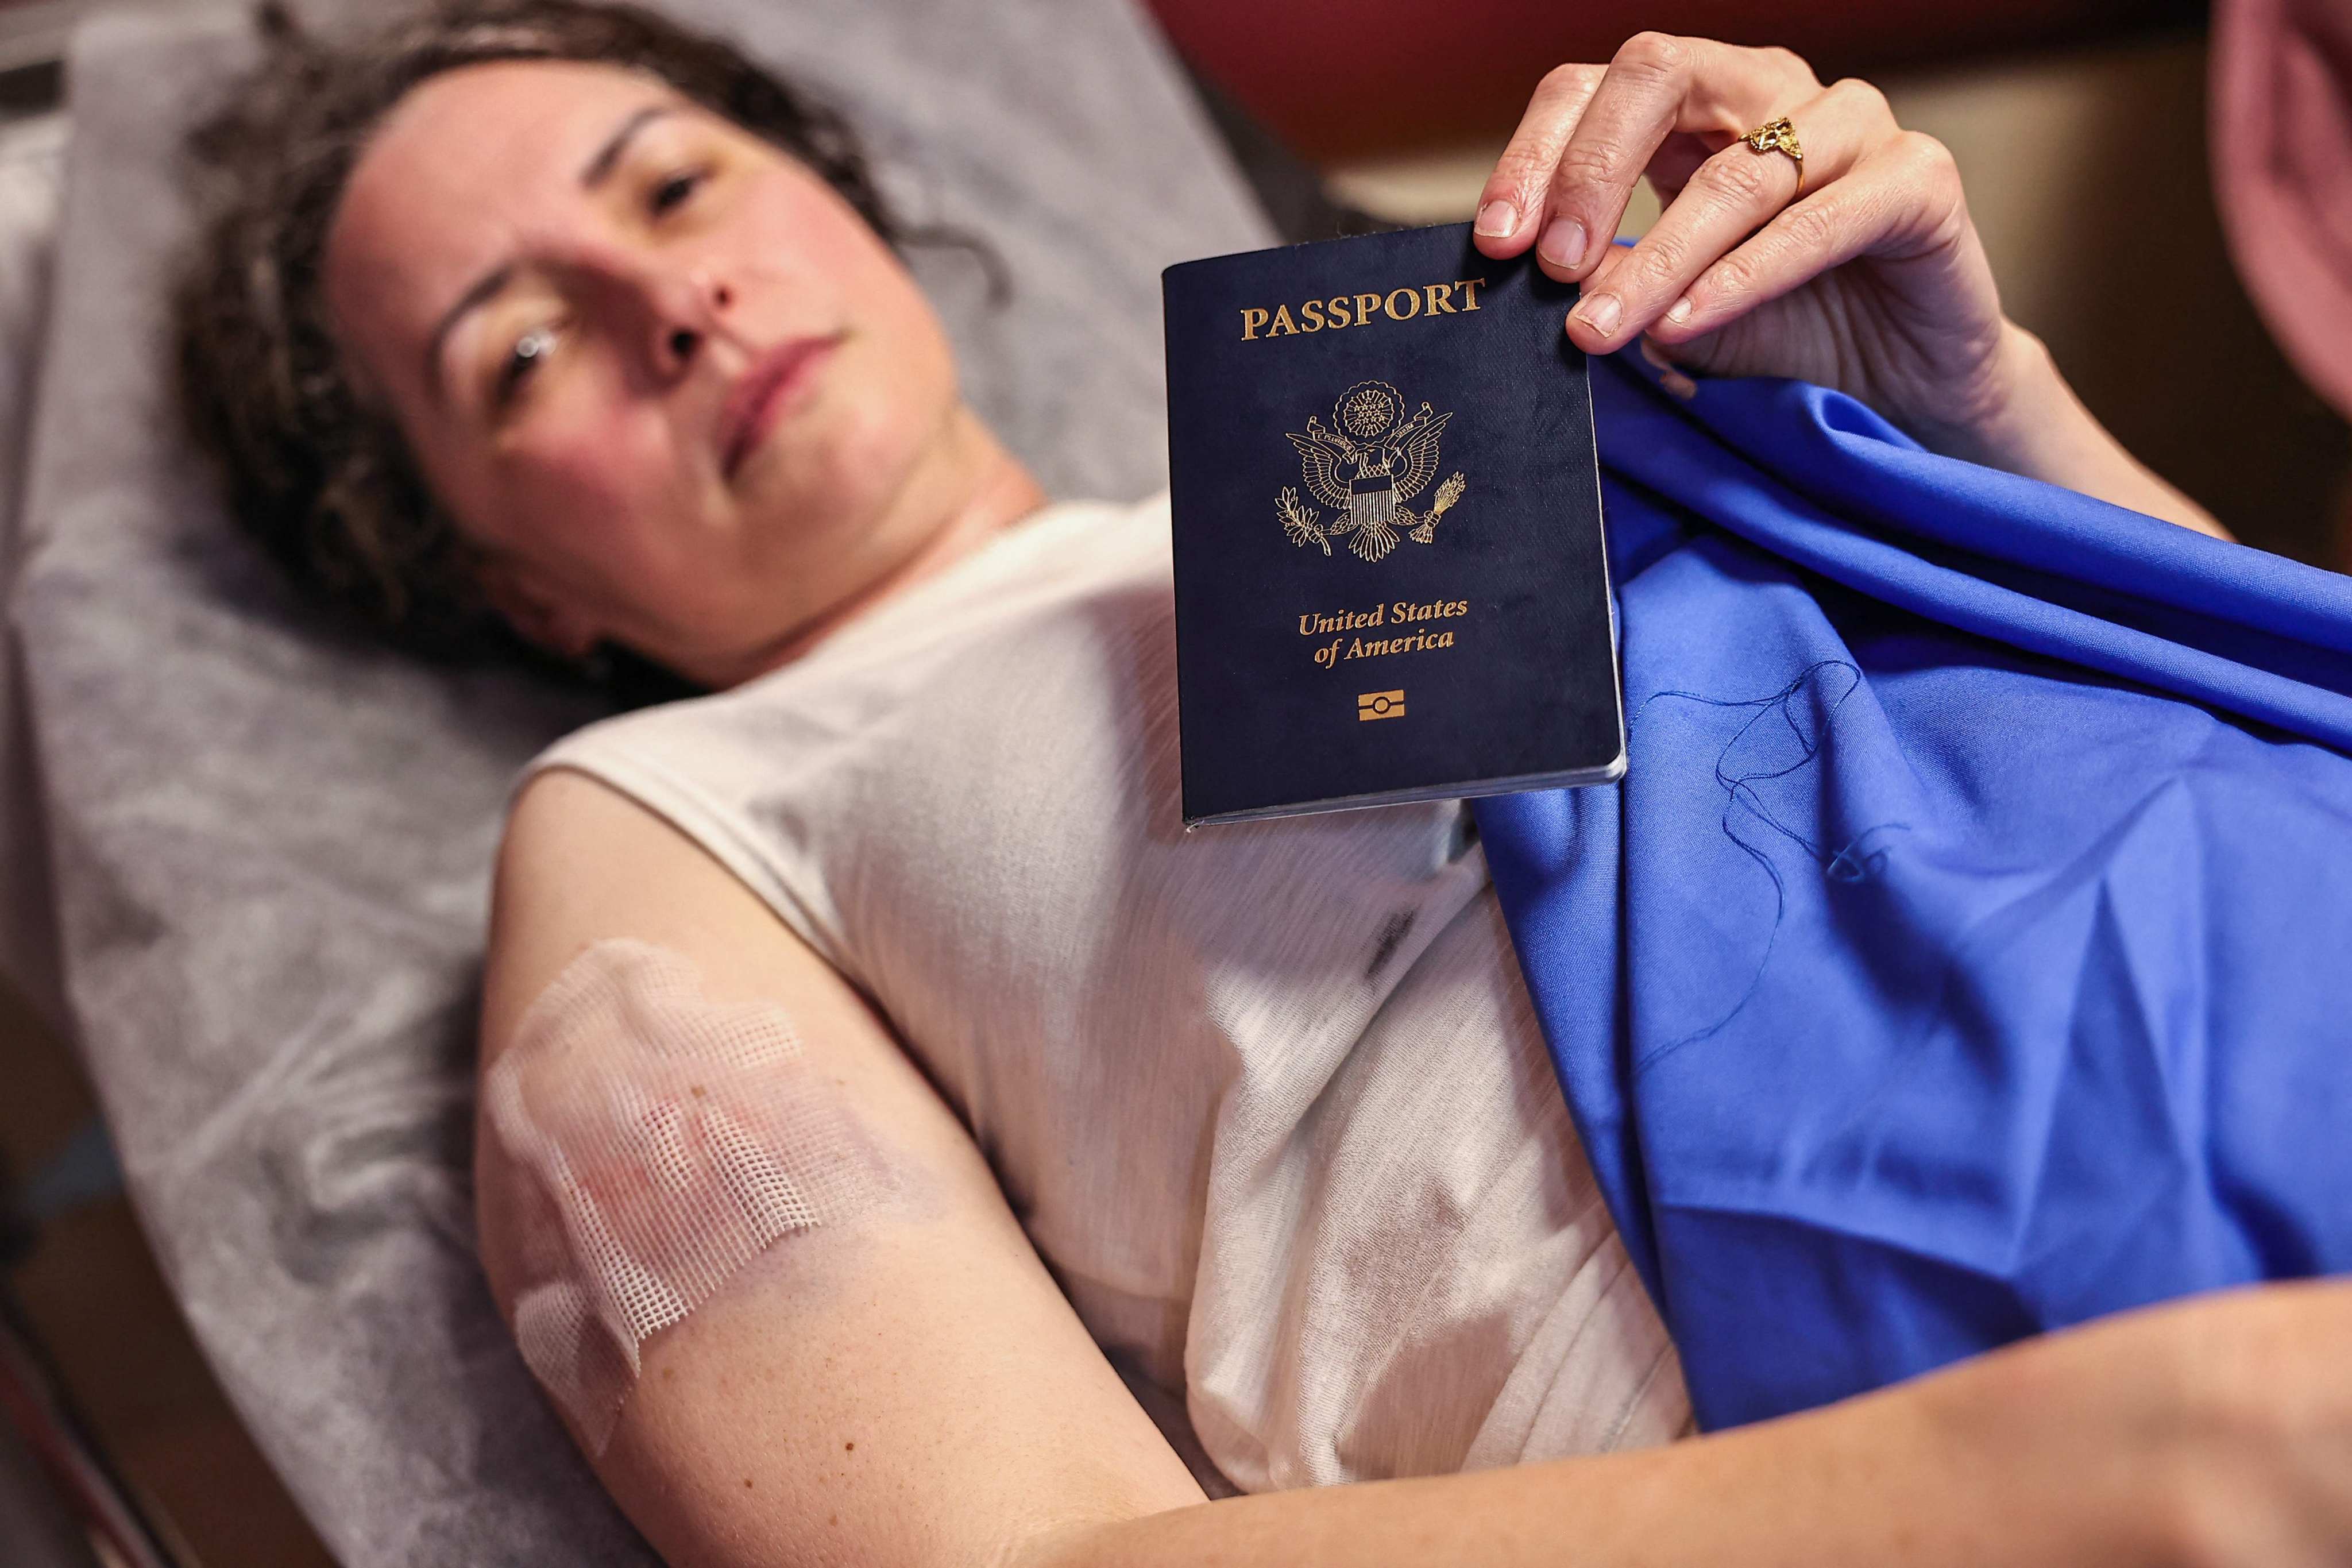 A member of a group of foreign volunteers shows her US passport as she receives treatment at Nablus’s Rafidia Hospital, after an attack by Israeli settlers in Qusra village, occupied West Bank, on Sunday. Photo: AFP